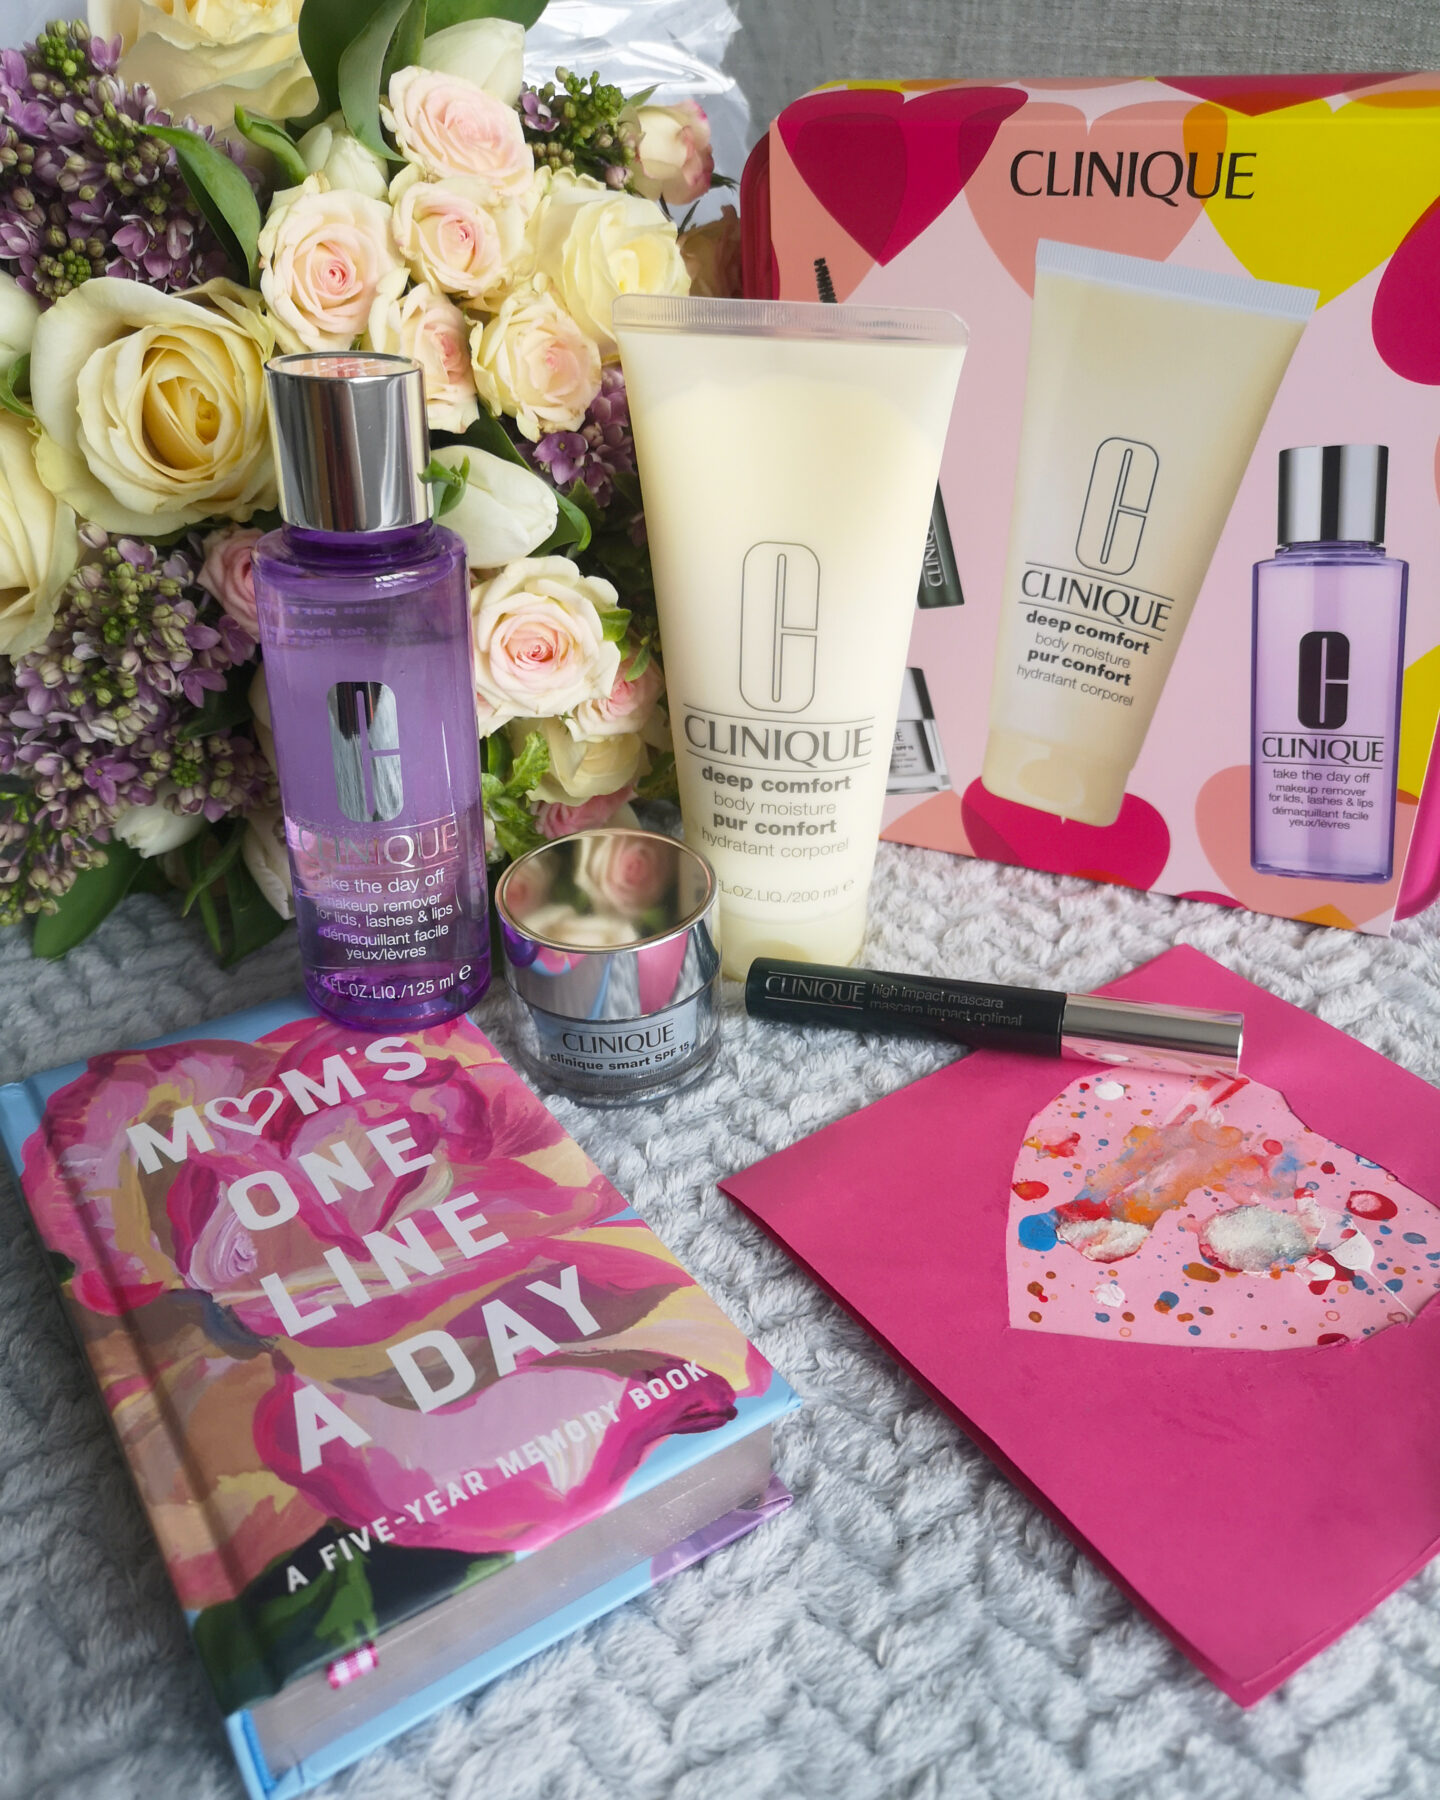 Love For All Mums With Boots, Boots, Mother's Day, Mother's Day 2023, Beauty Products, Beauty Selection, Clinique, Champneys Spa, Max Factor, Lipstick, Gift Set, Mother Figure, Pampering Time, Mother's Day Selection